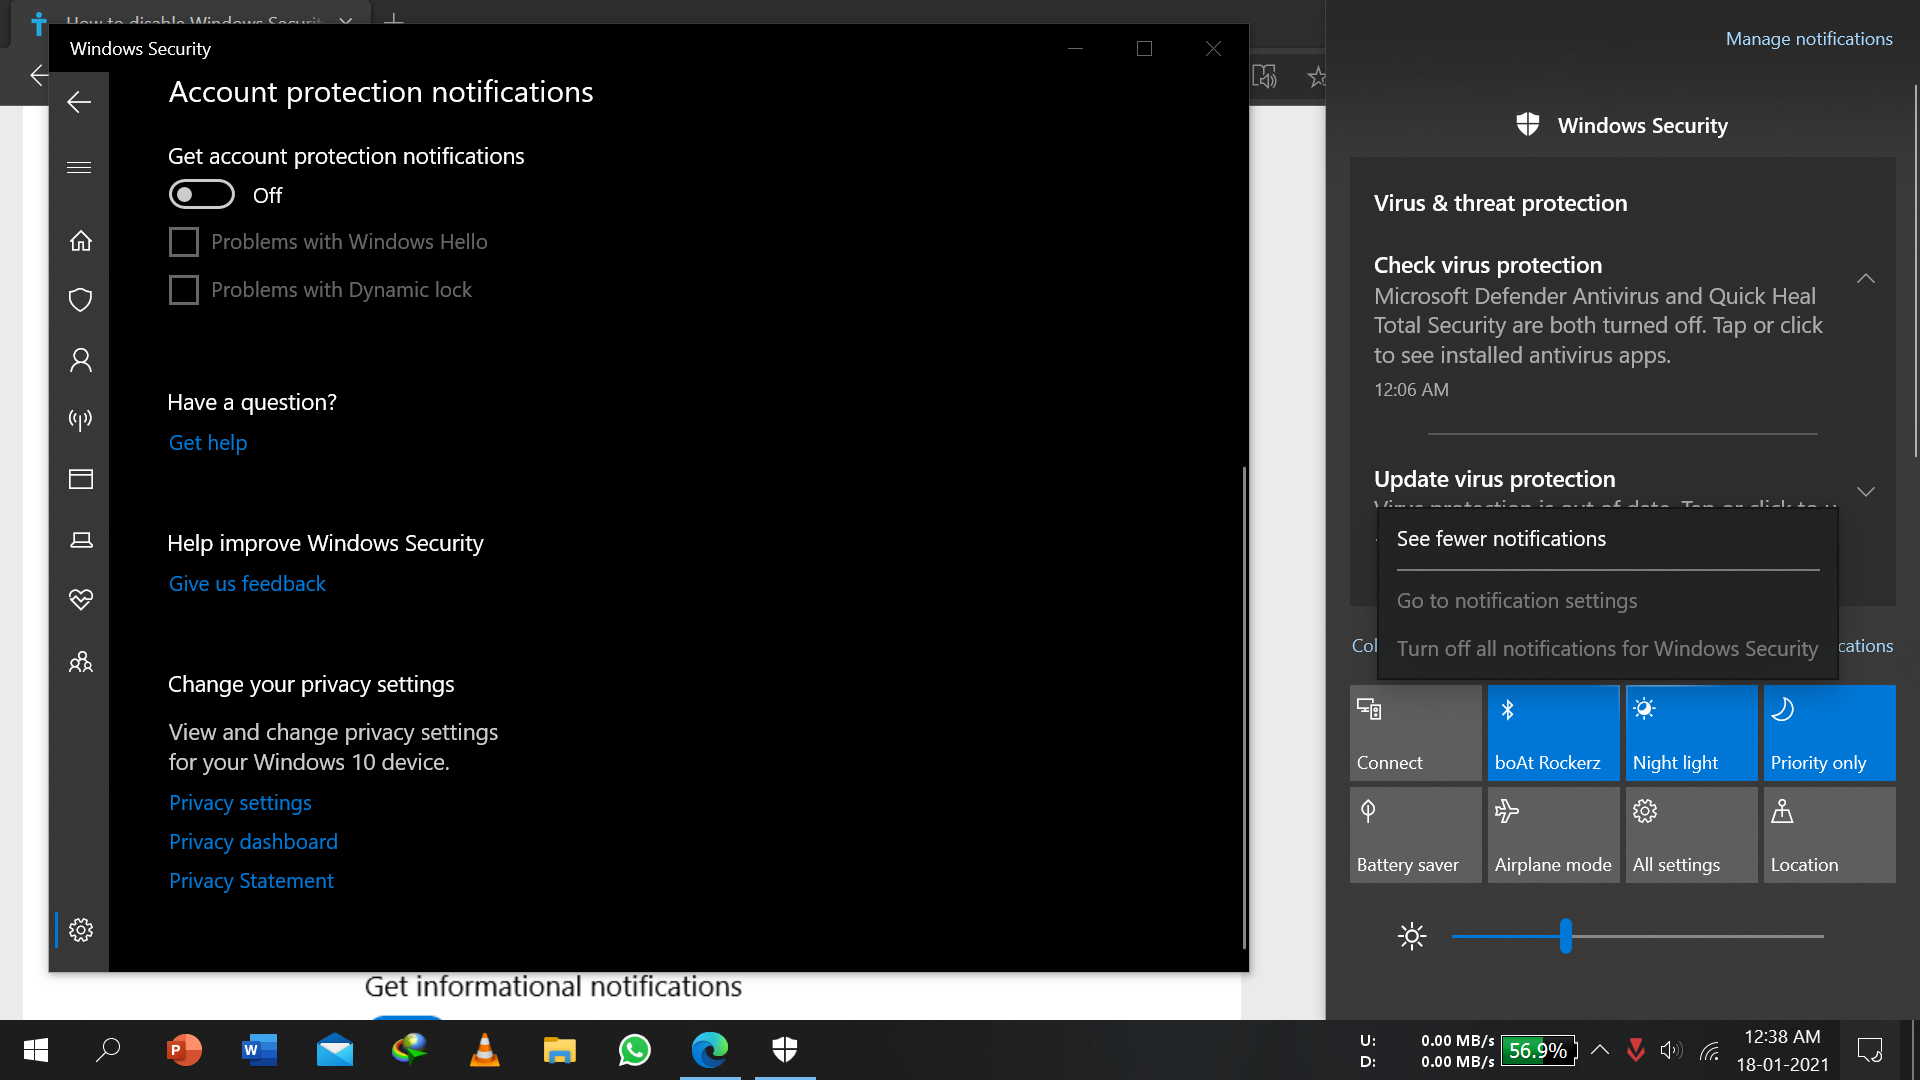 reagarding turning off all notification from windows security e3776a72-e947-4adf-9739-ada3186806fe?upload=true.png